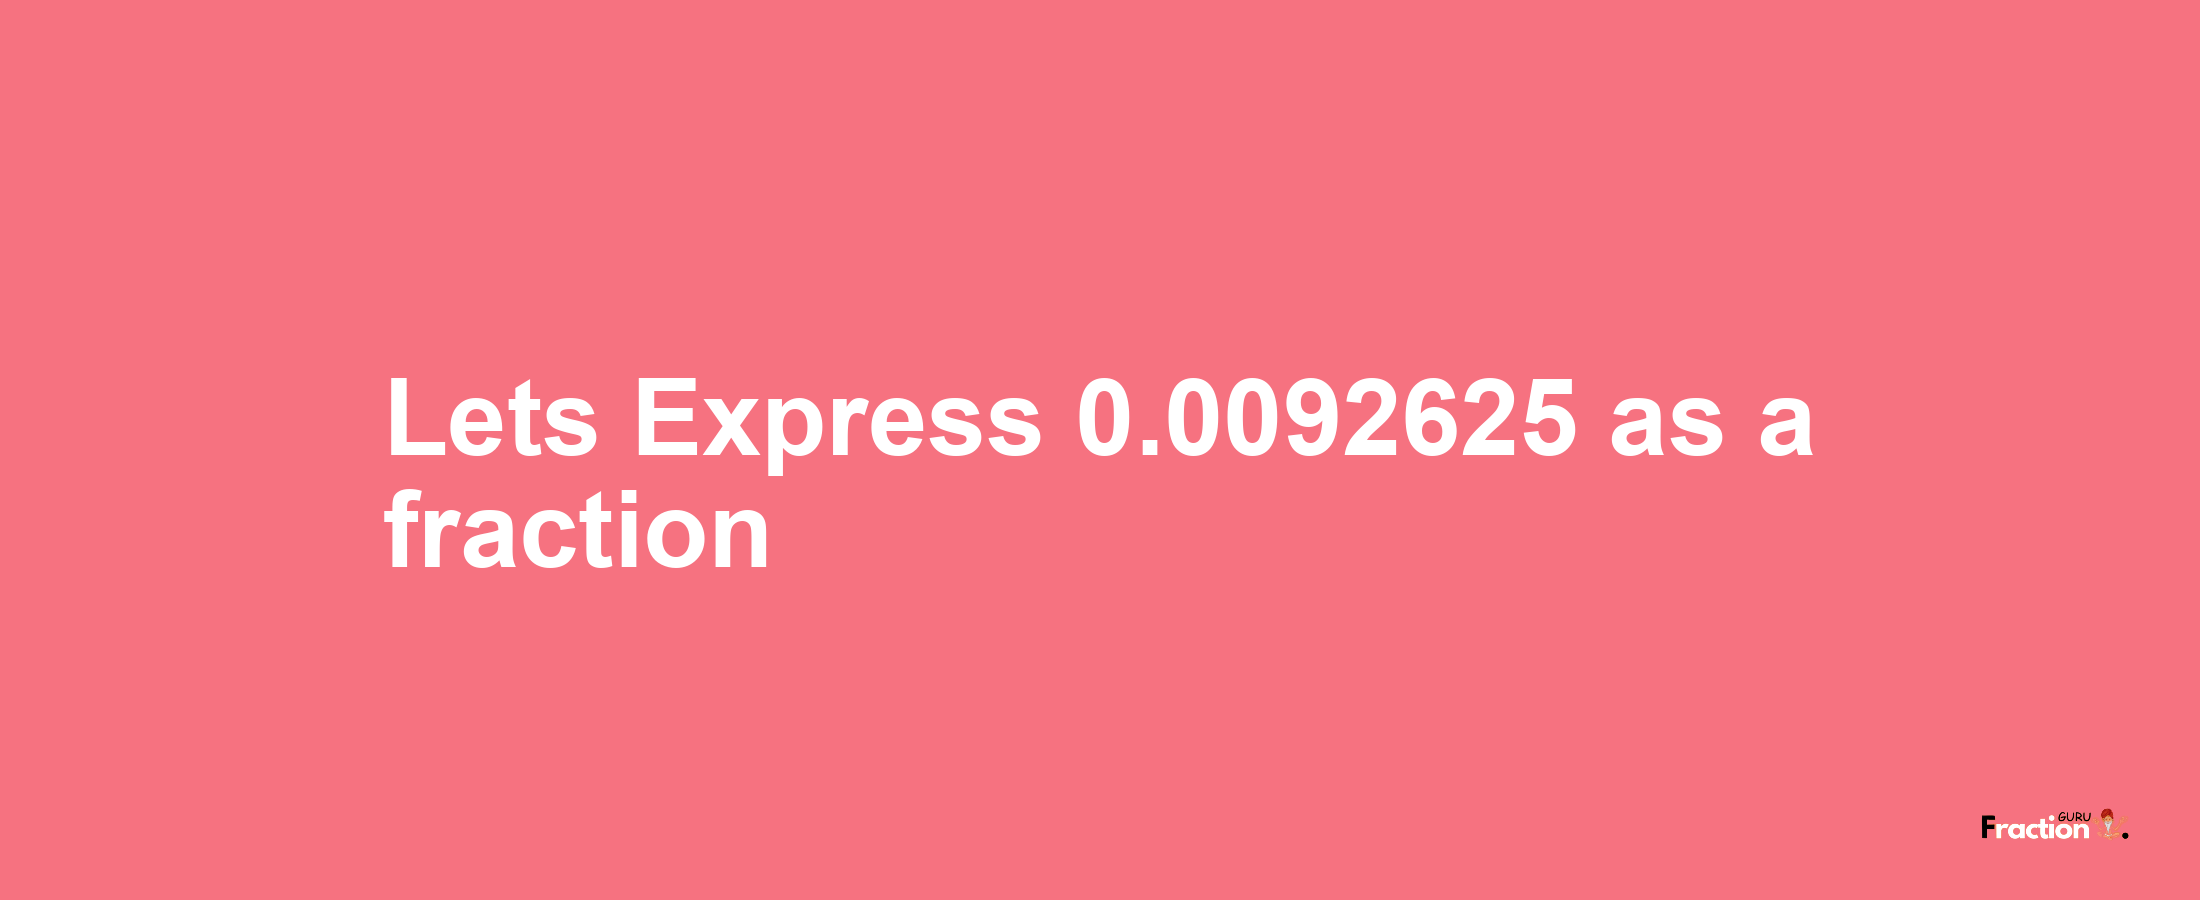 Lets Express 0.0092625 as afraction